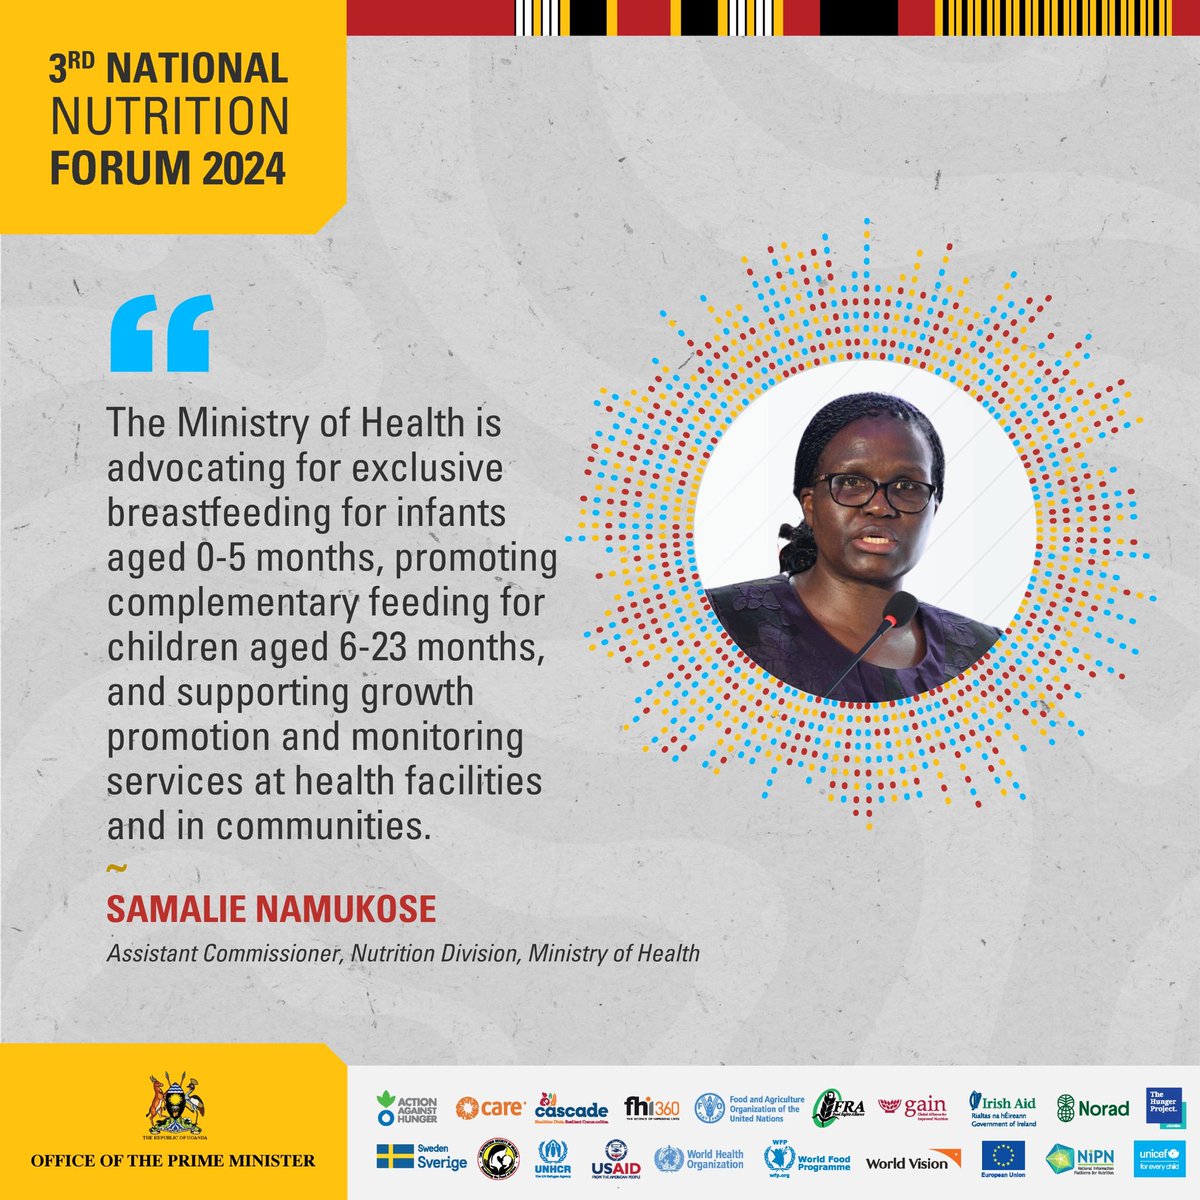 #NationalNutritionForum2024 #UnlockingNutritionPotential Thematic areas of the forum include ⬇️ •Food & Nutrition Security •Catalyzing Change in Healthcare •Nutrition Security in refugee contexts •Nutrition in Uganda’s education •Partnerships for Nutrition governance…